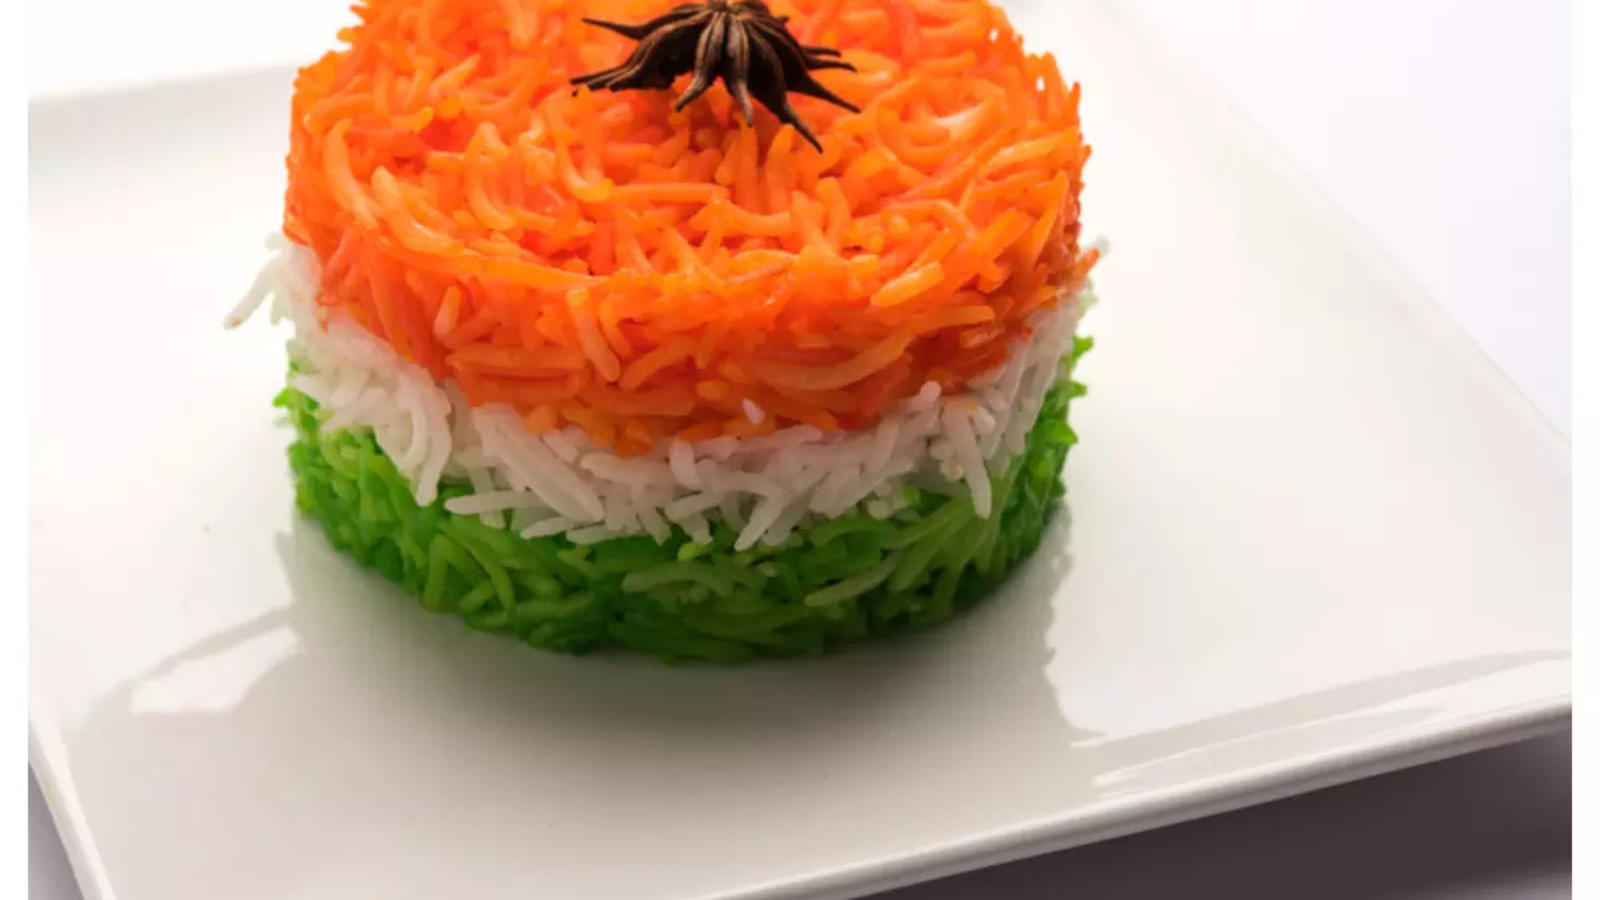 Republic Day Recipes: Celebrate this Republic Day with Tri-Colour Cakes,  Cookies, Sandvich & More Easy Republic Day Recipes at Times Food